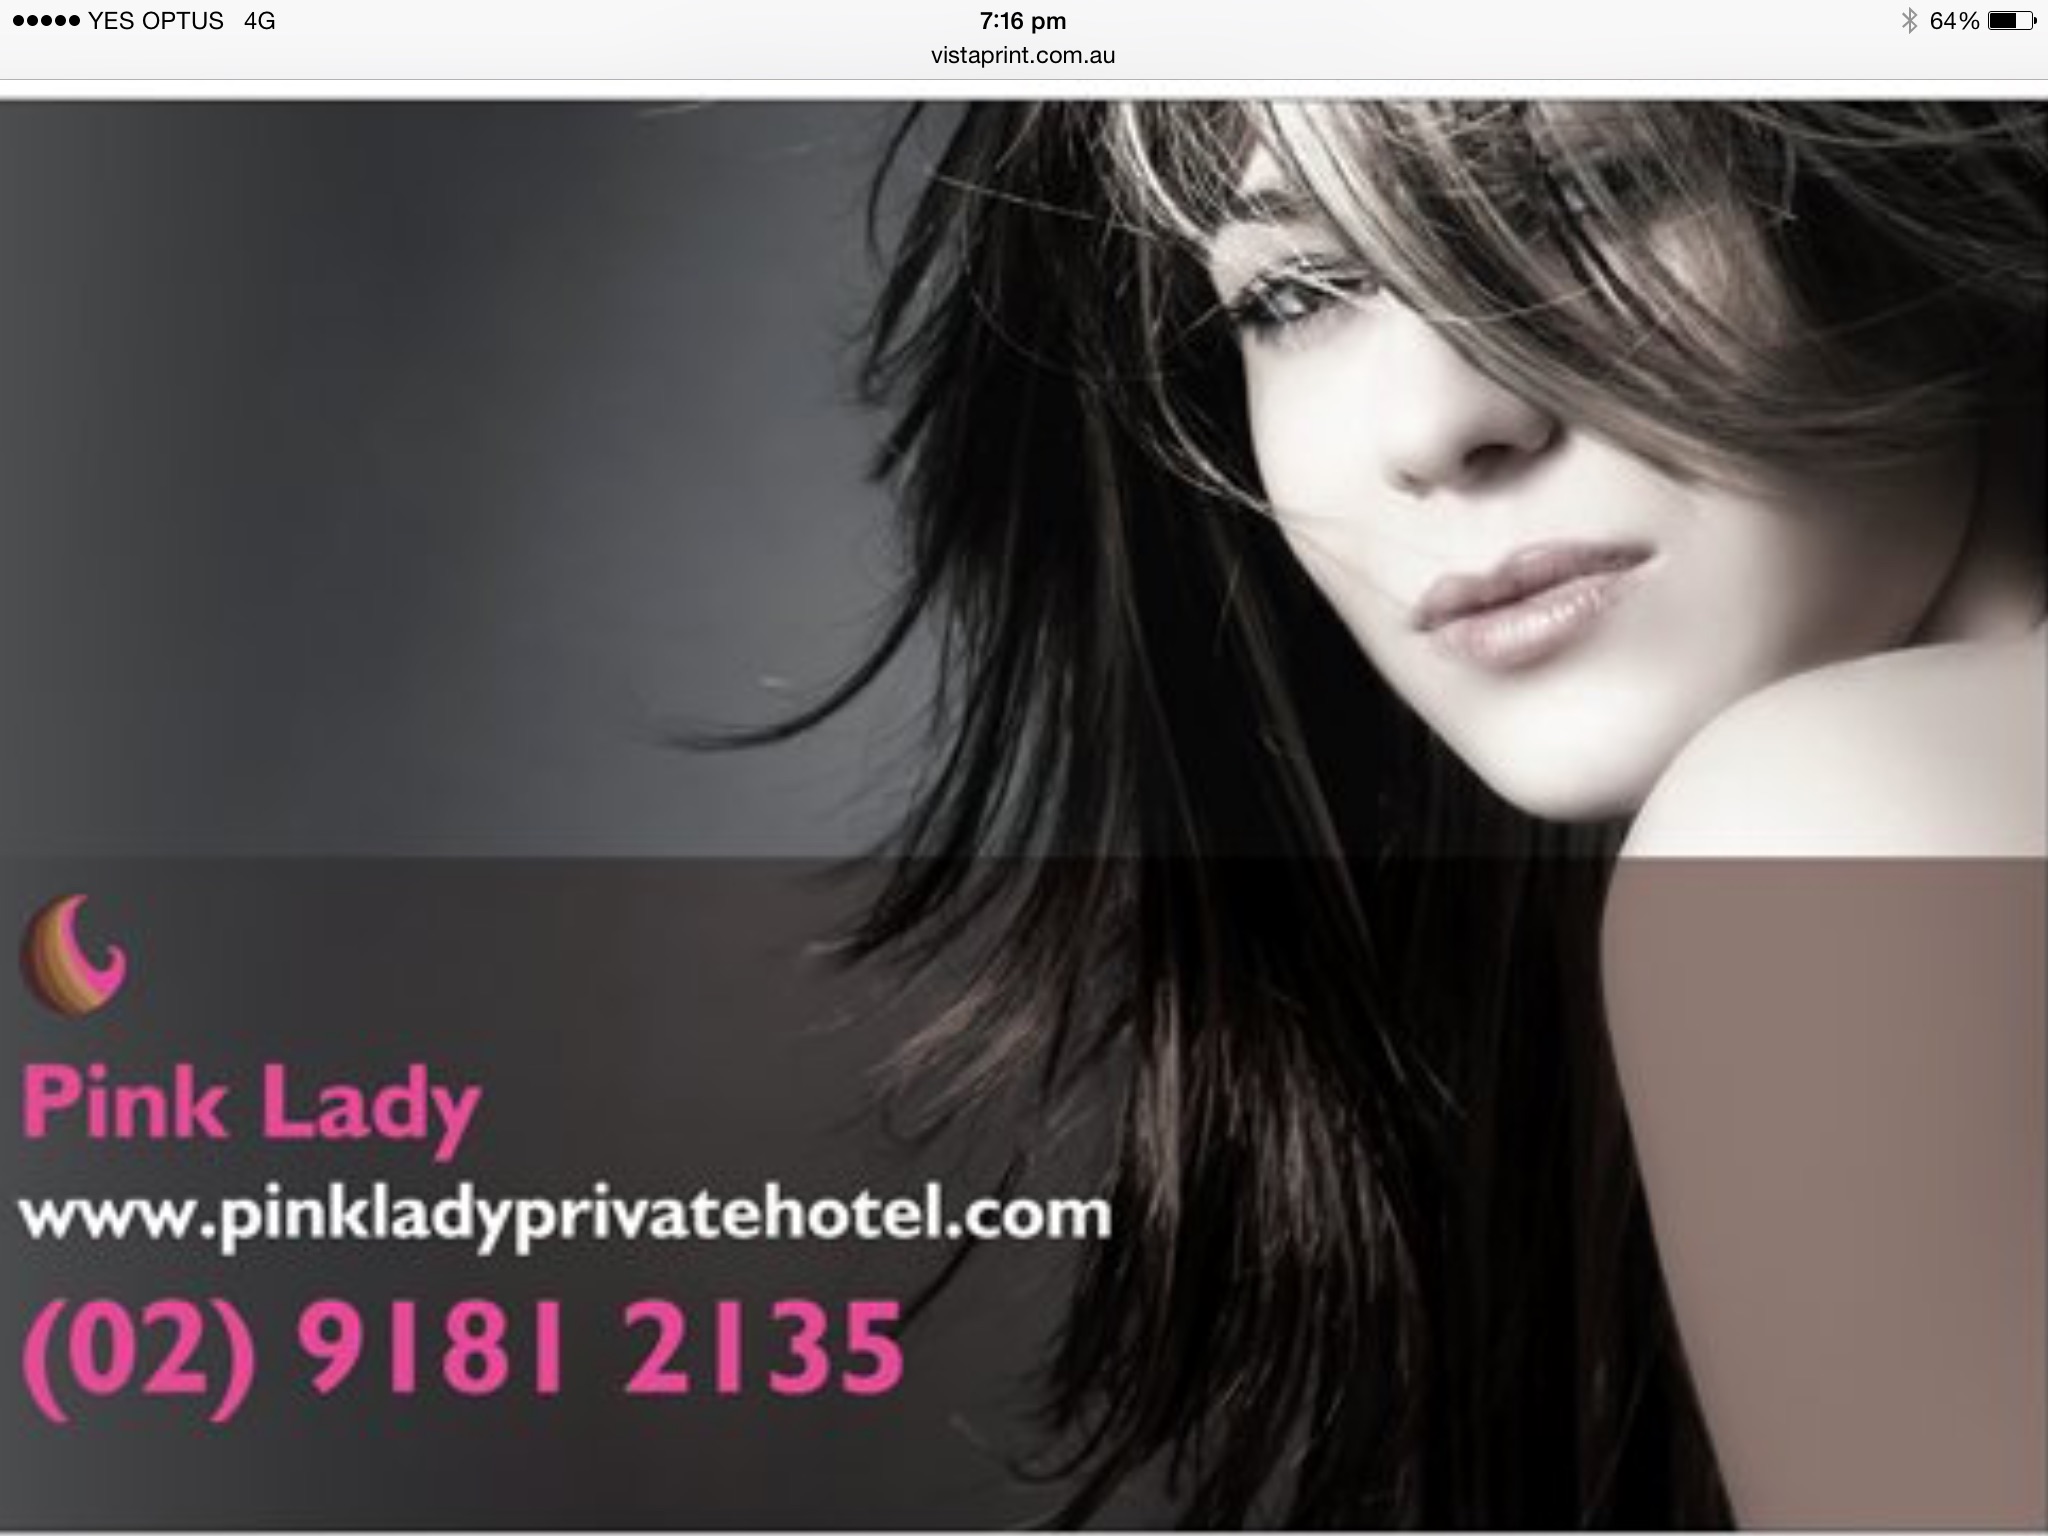 Pink Lady Private Hotel - Casino Accommodation